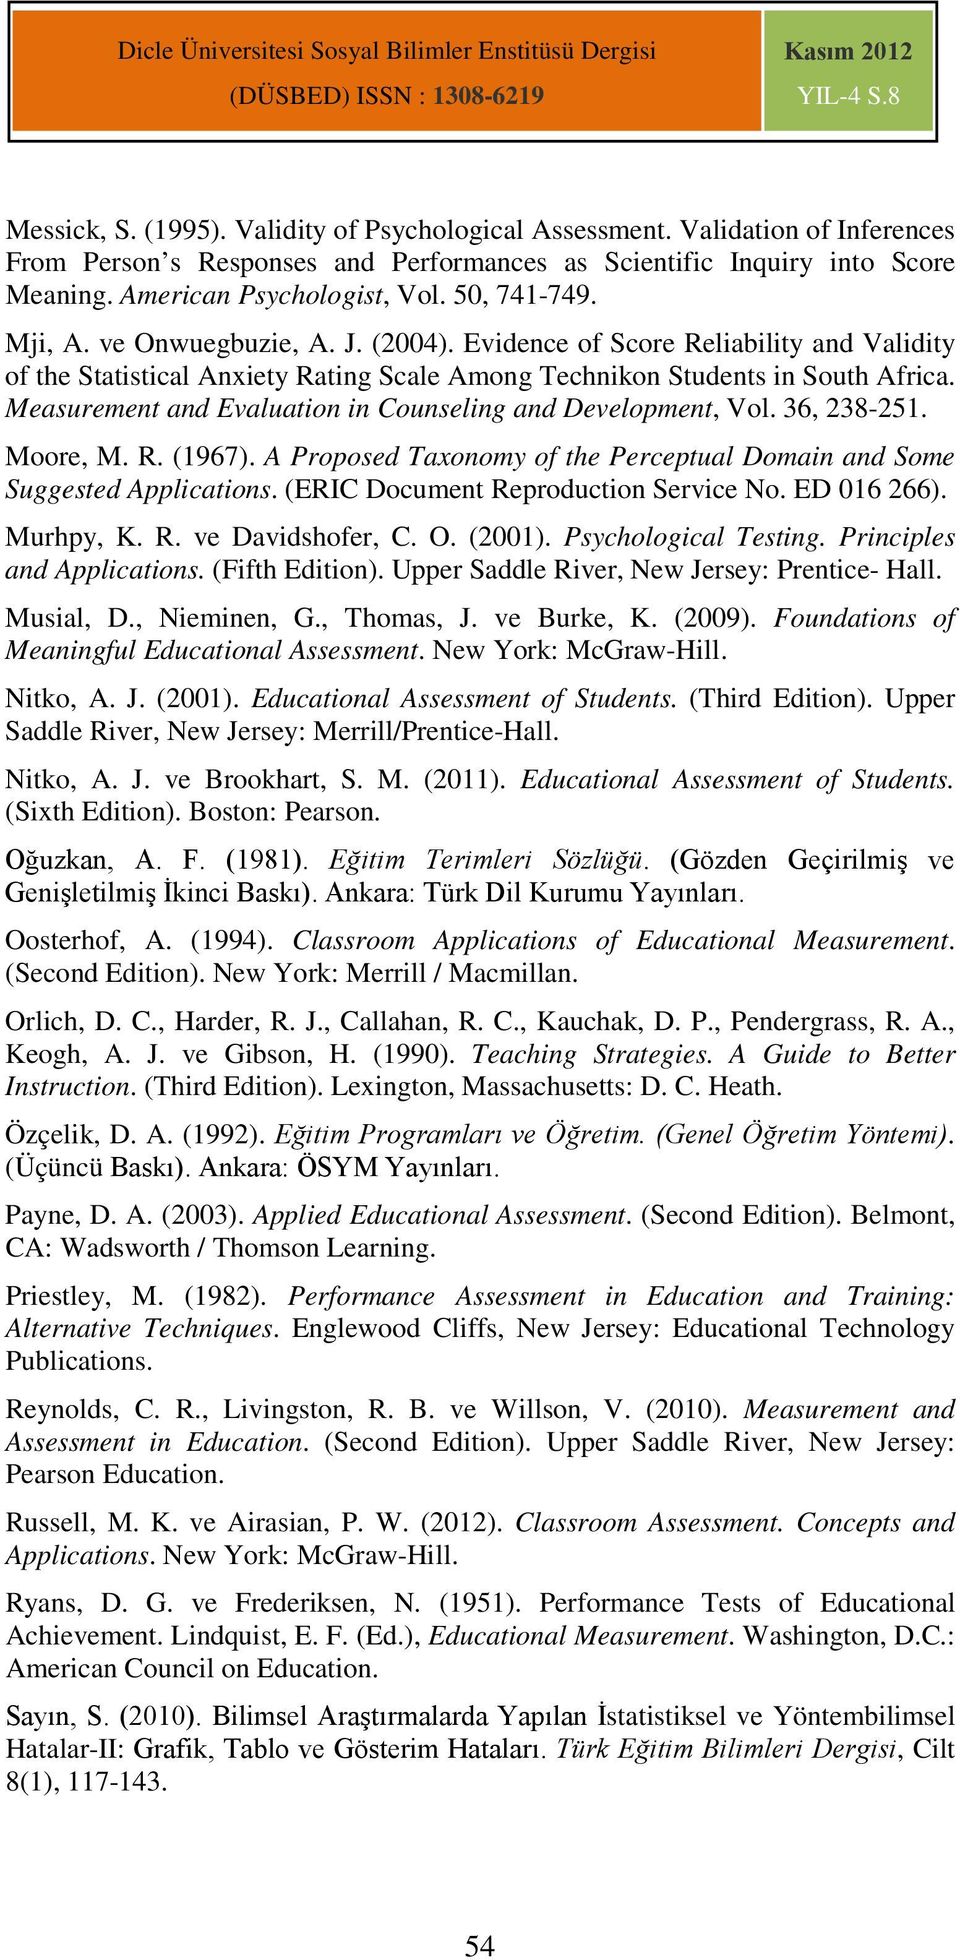 Measurement and Evaluation in Counseling and Development, Vol. 36, 238-251. Moore, M. R. (1967). A Proposed Taxonomy of the Perceptual Domain and Some Suggested Applications.